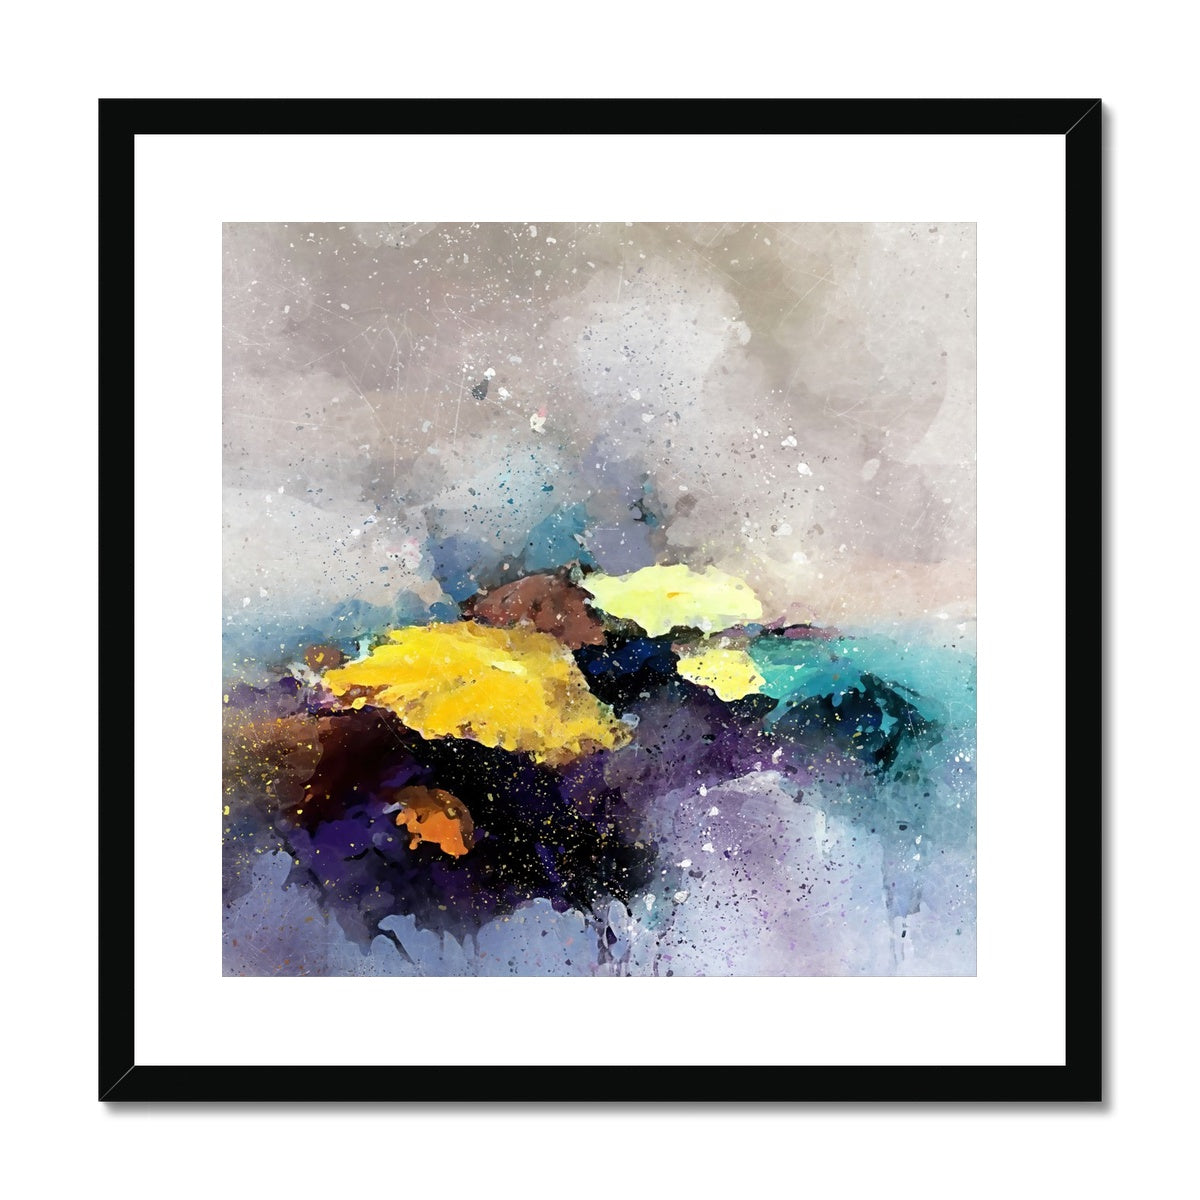 Braving the Elements Framed & Mounted Print